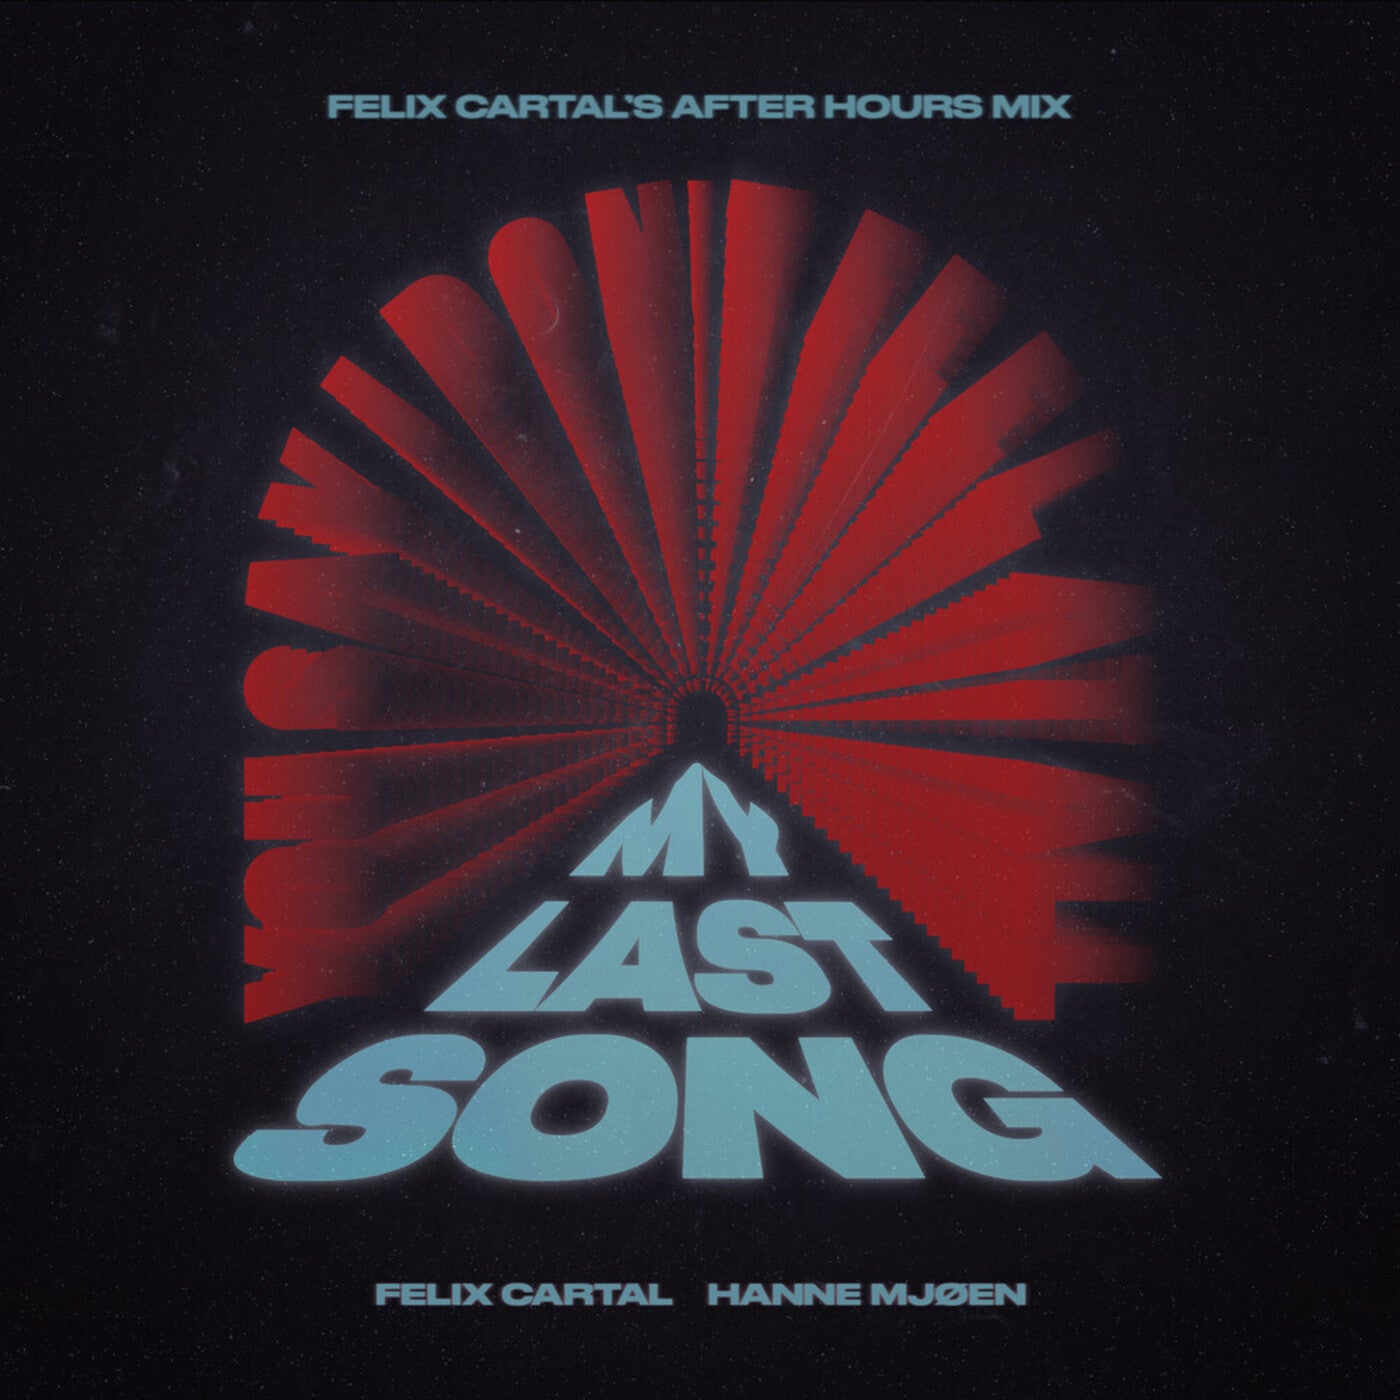 My Last Song (Felix Cartal's After Hours Extended Mix)